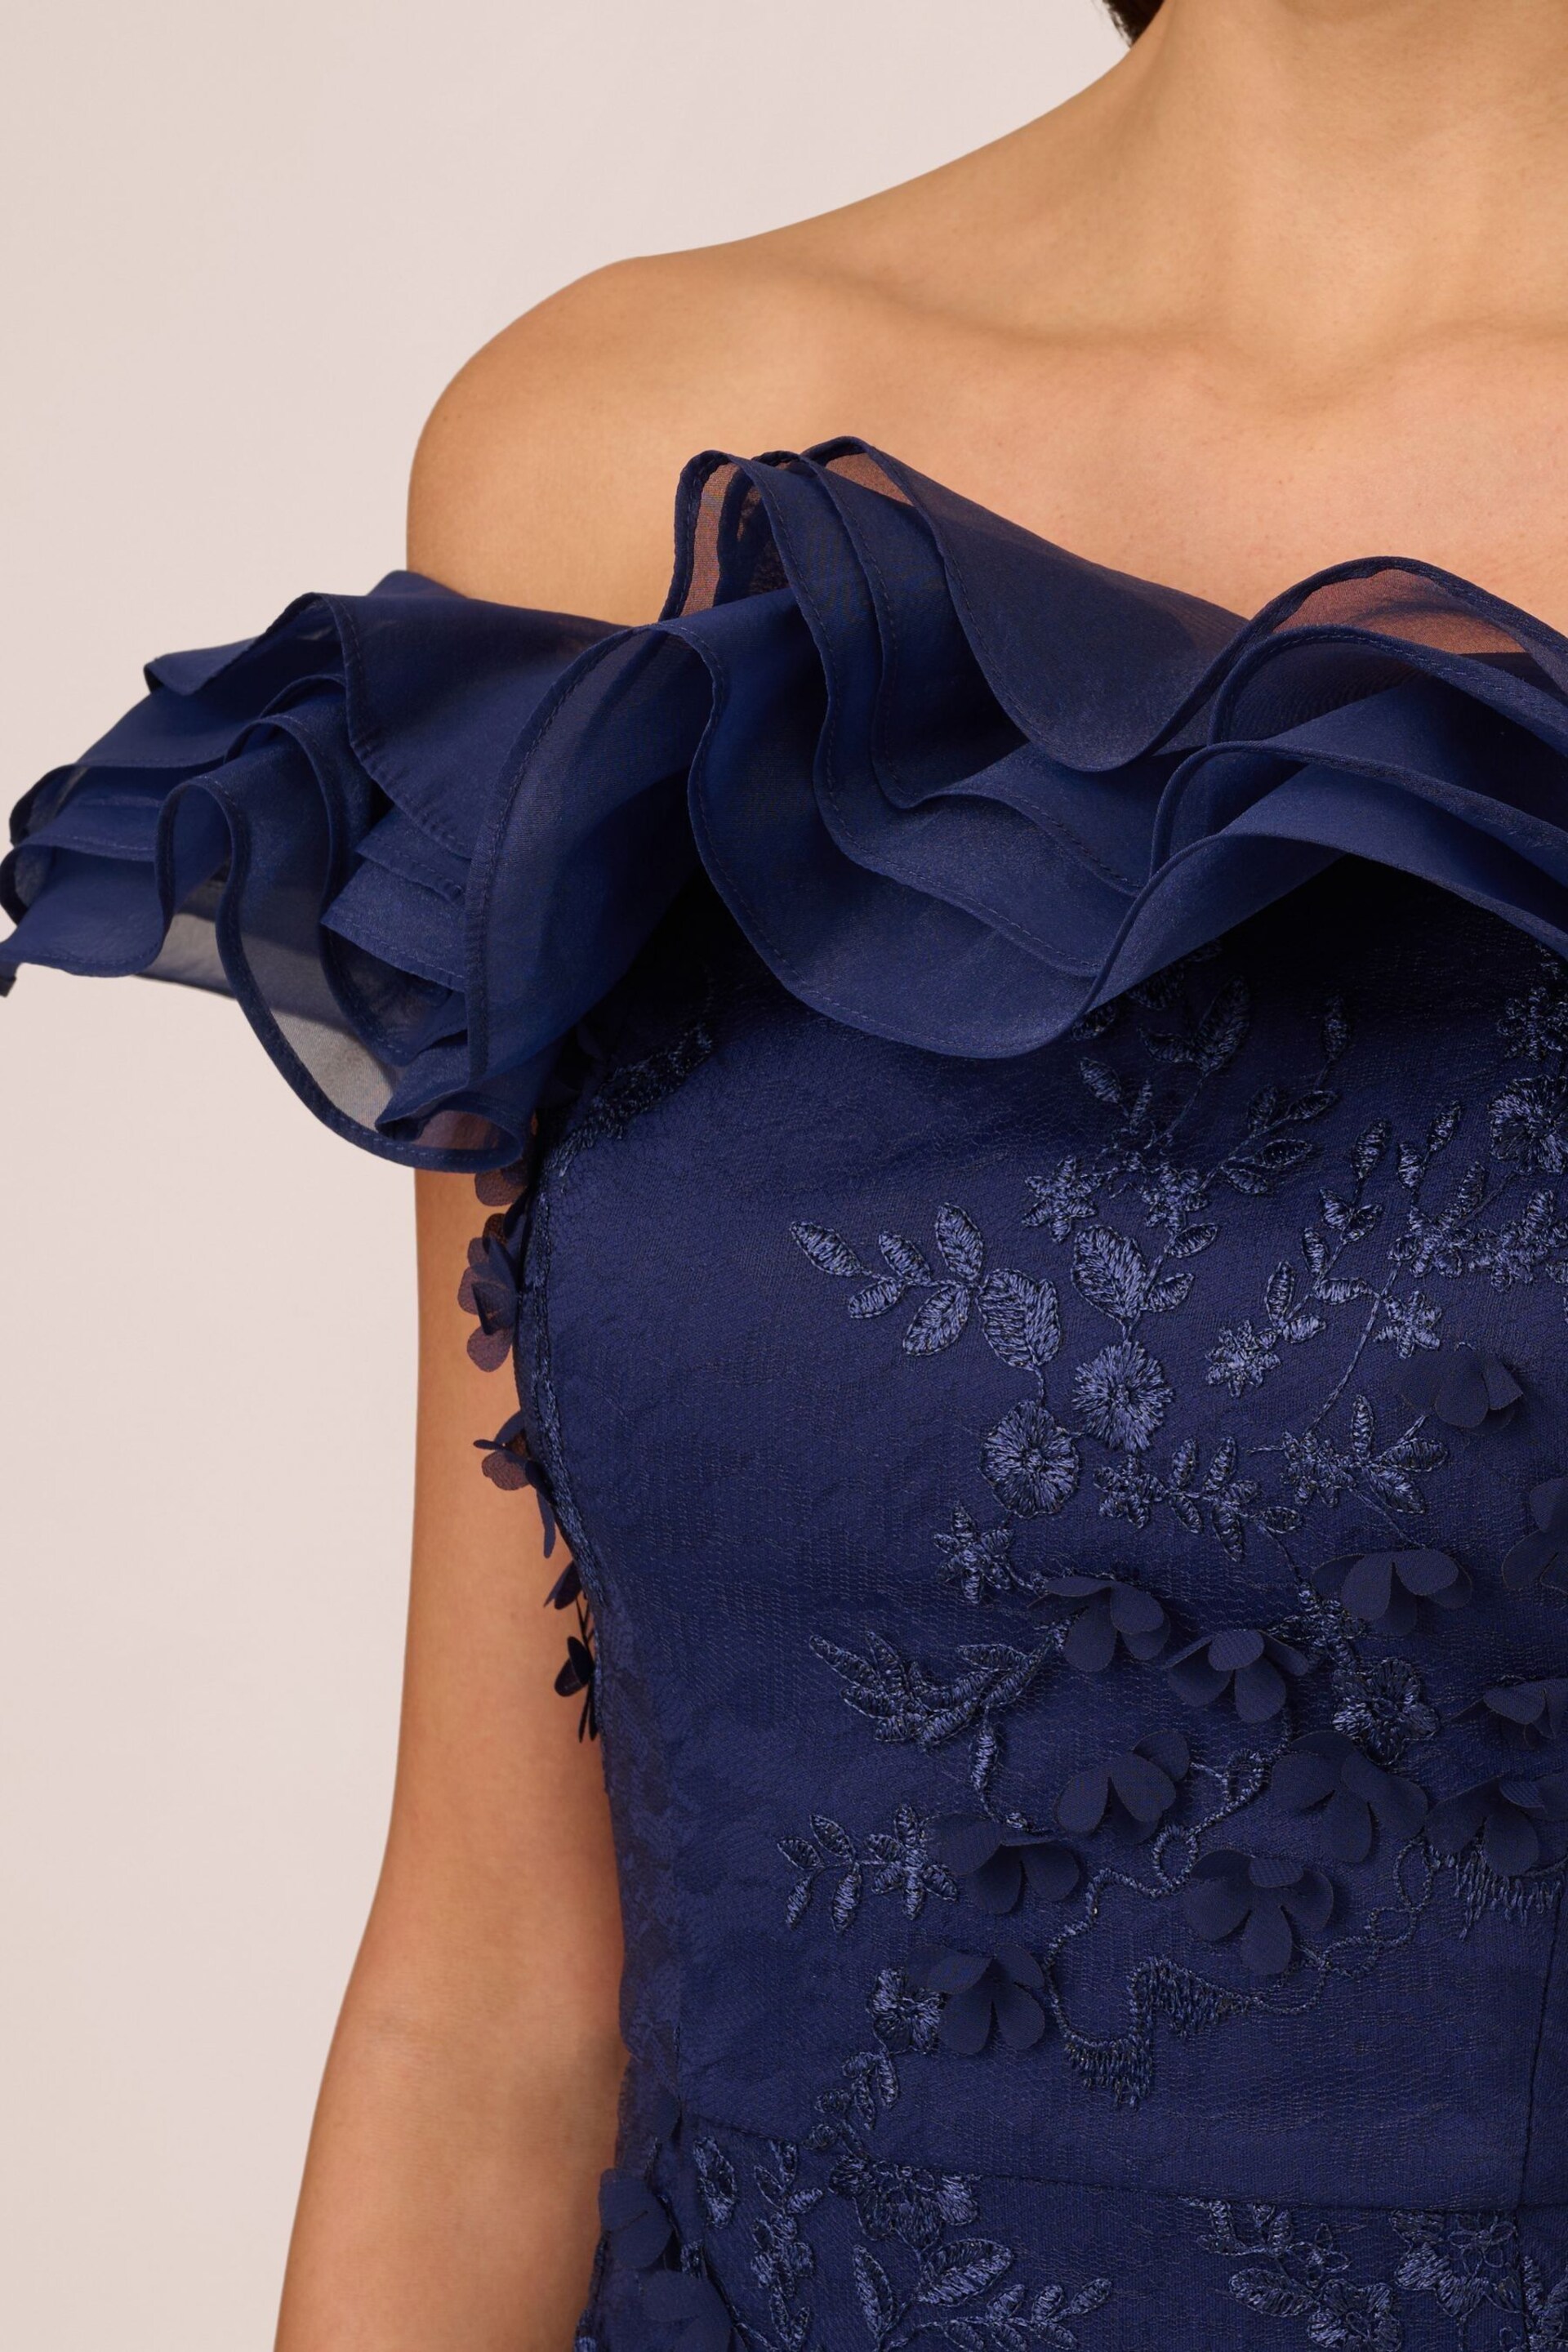 Adrianna Papell Blue Floral Ruffle Gown - Image 5 of 7